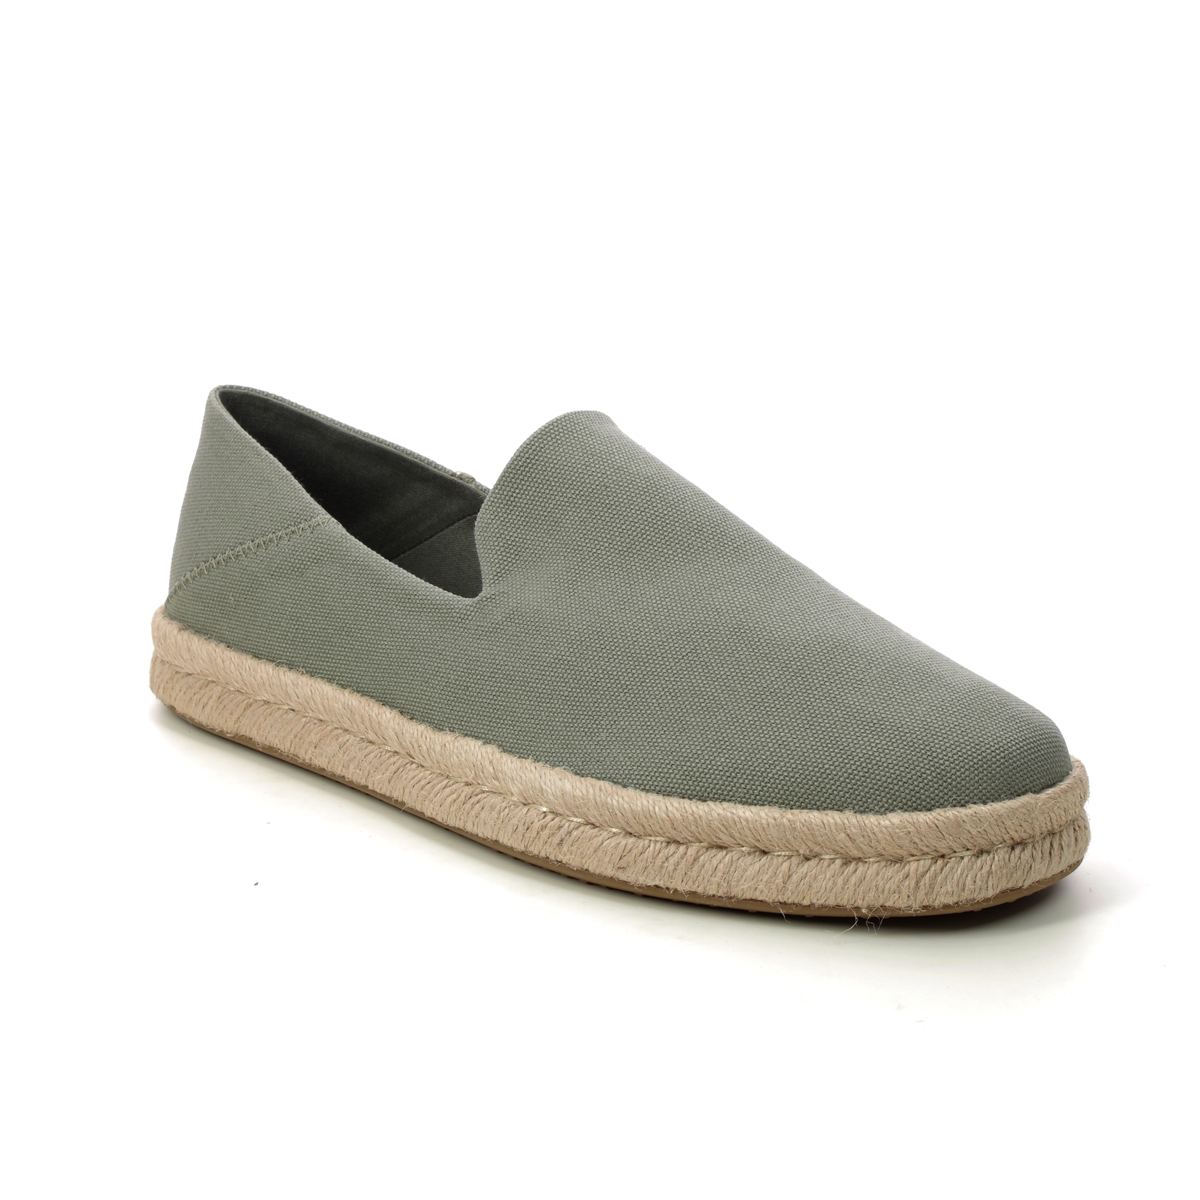 Toms Santiago Alp 2 Sage green Mens Closed Toe Sandals 10020071-90 in a Plain Canvas in Size 11